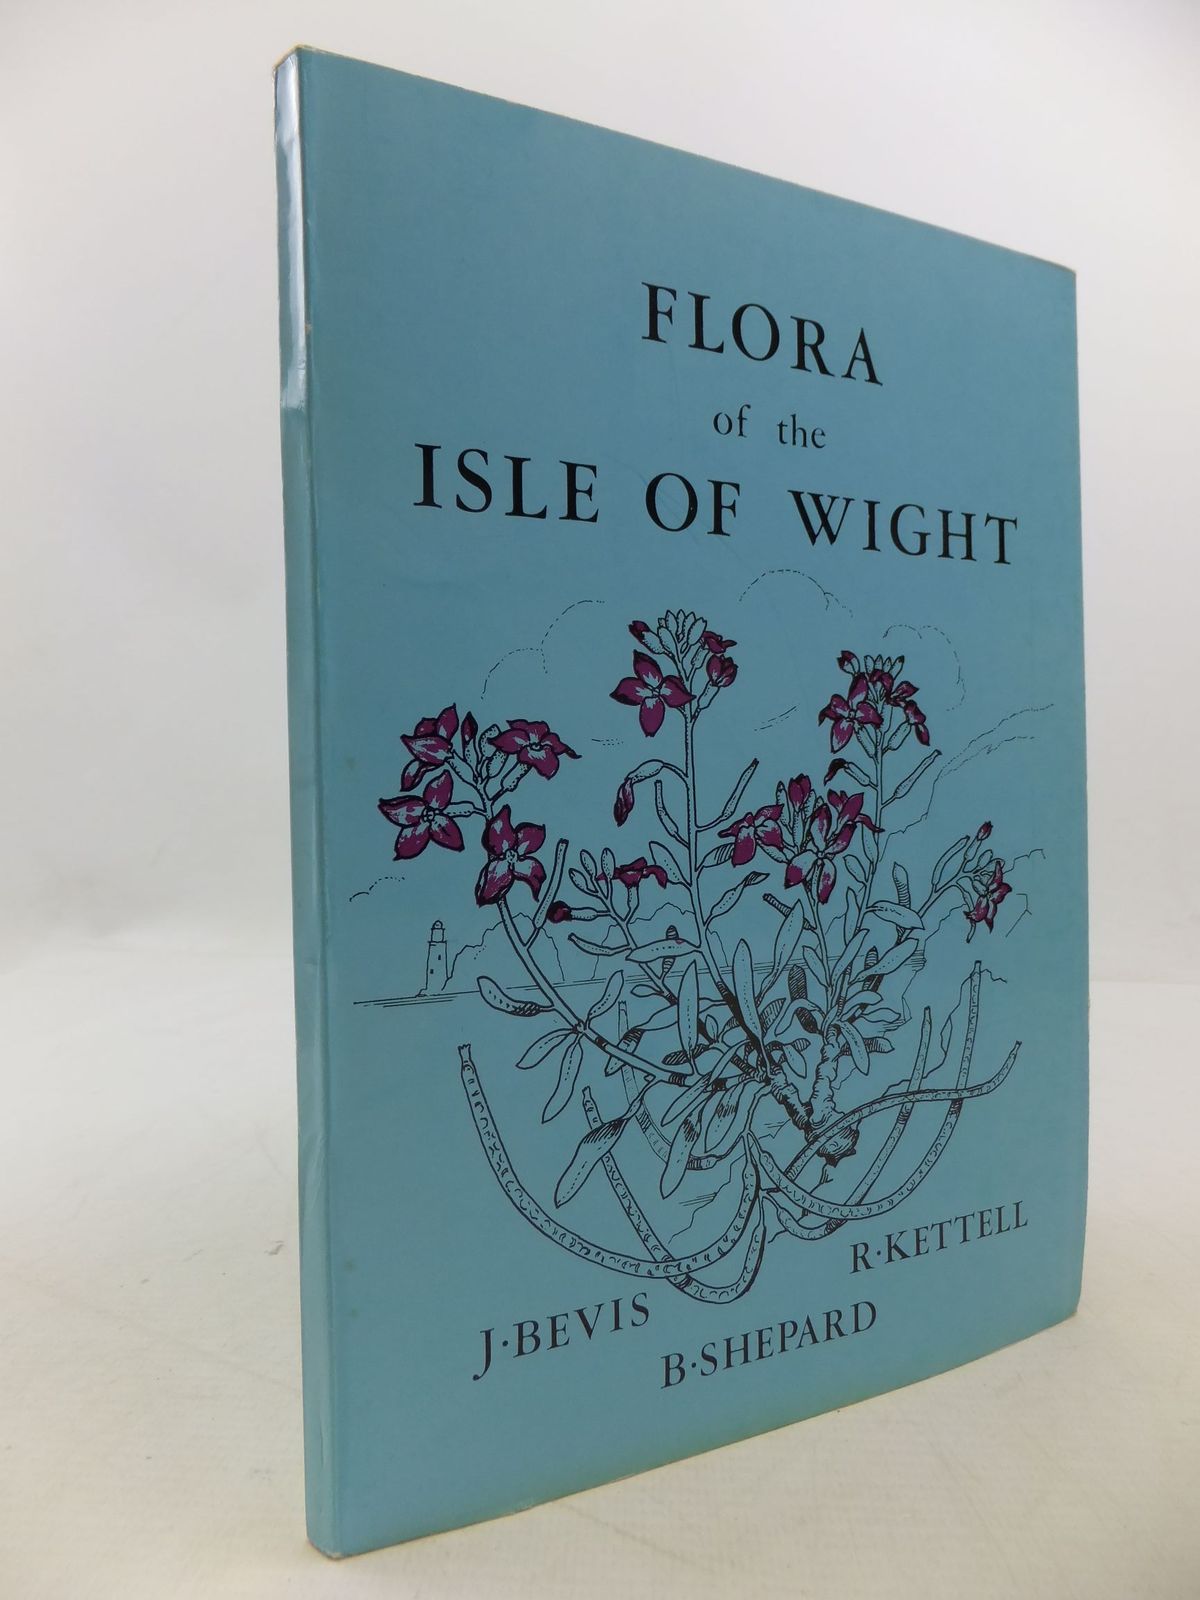 Photo of FLORA OF THE ISLE OF WIGHT written by Bevis, J.H. Kettell, R.E. Shepard, B. Frazer, O.H. published by Isle of Wight Archaeological Society (STOCK CODE: 2112324)  for sale by Stella & Rose's Books